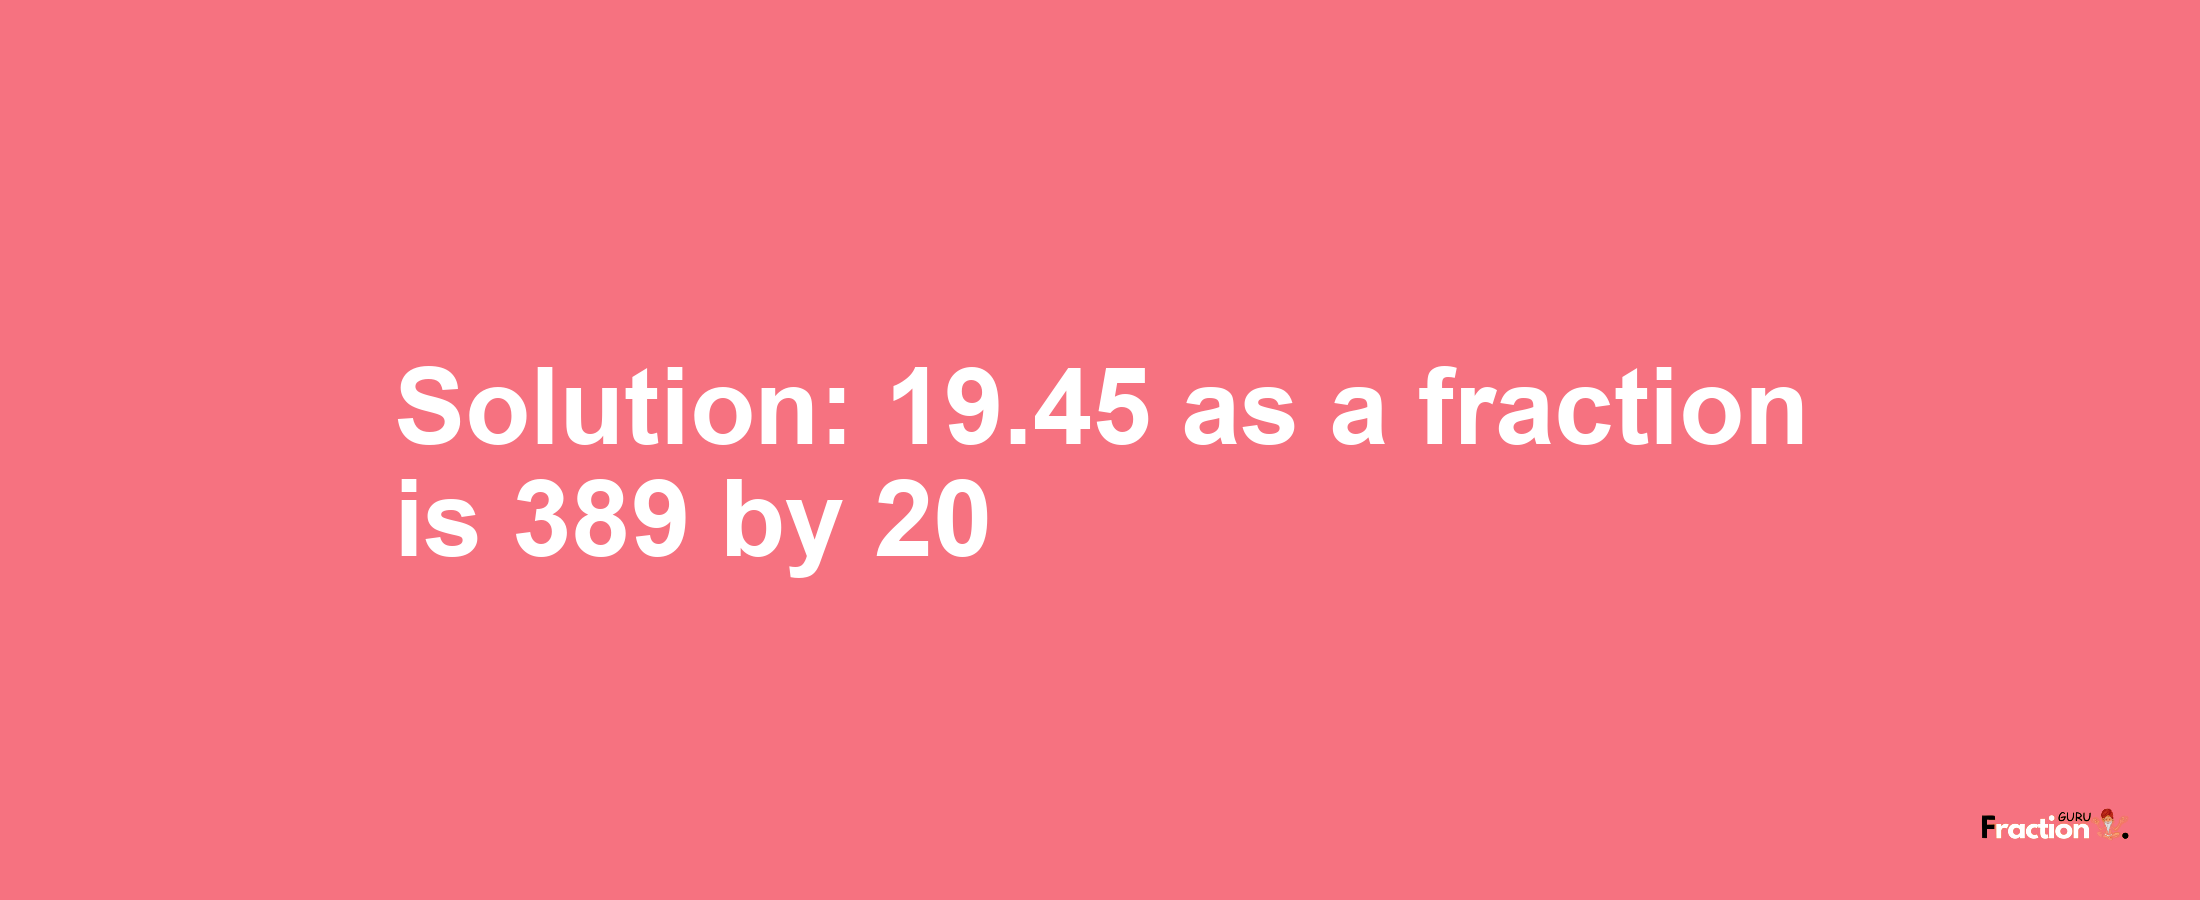 Solution:19.45 as a fraction is 389/20